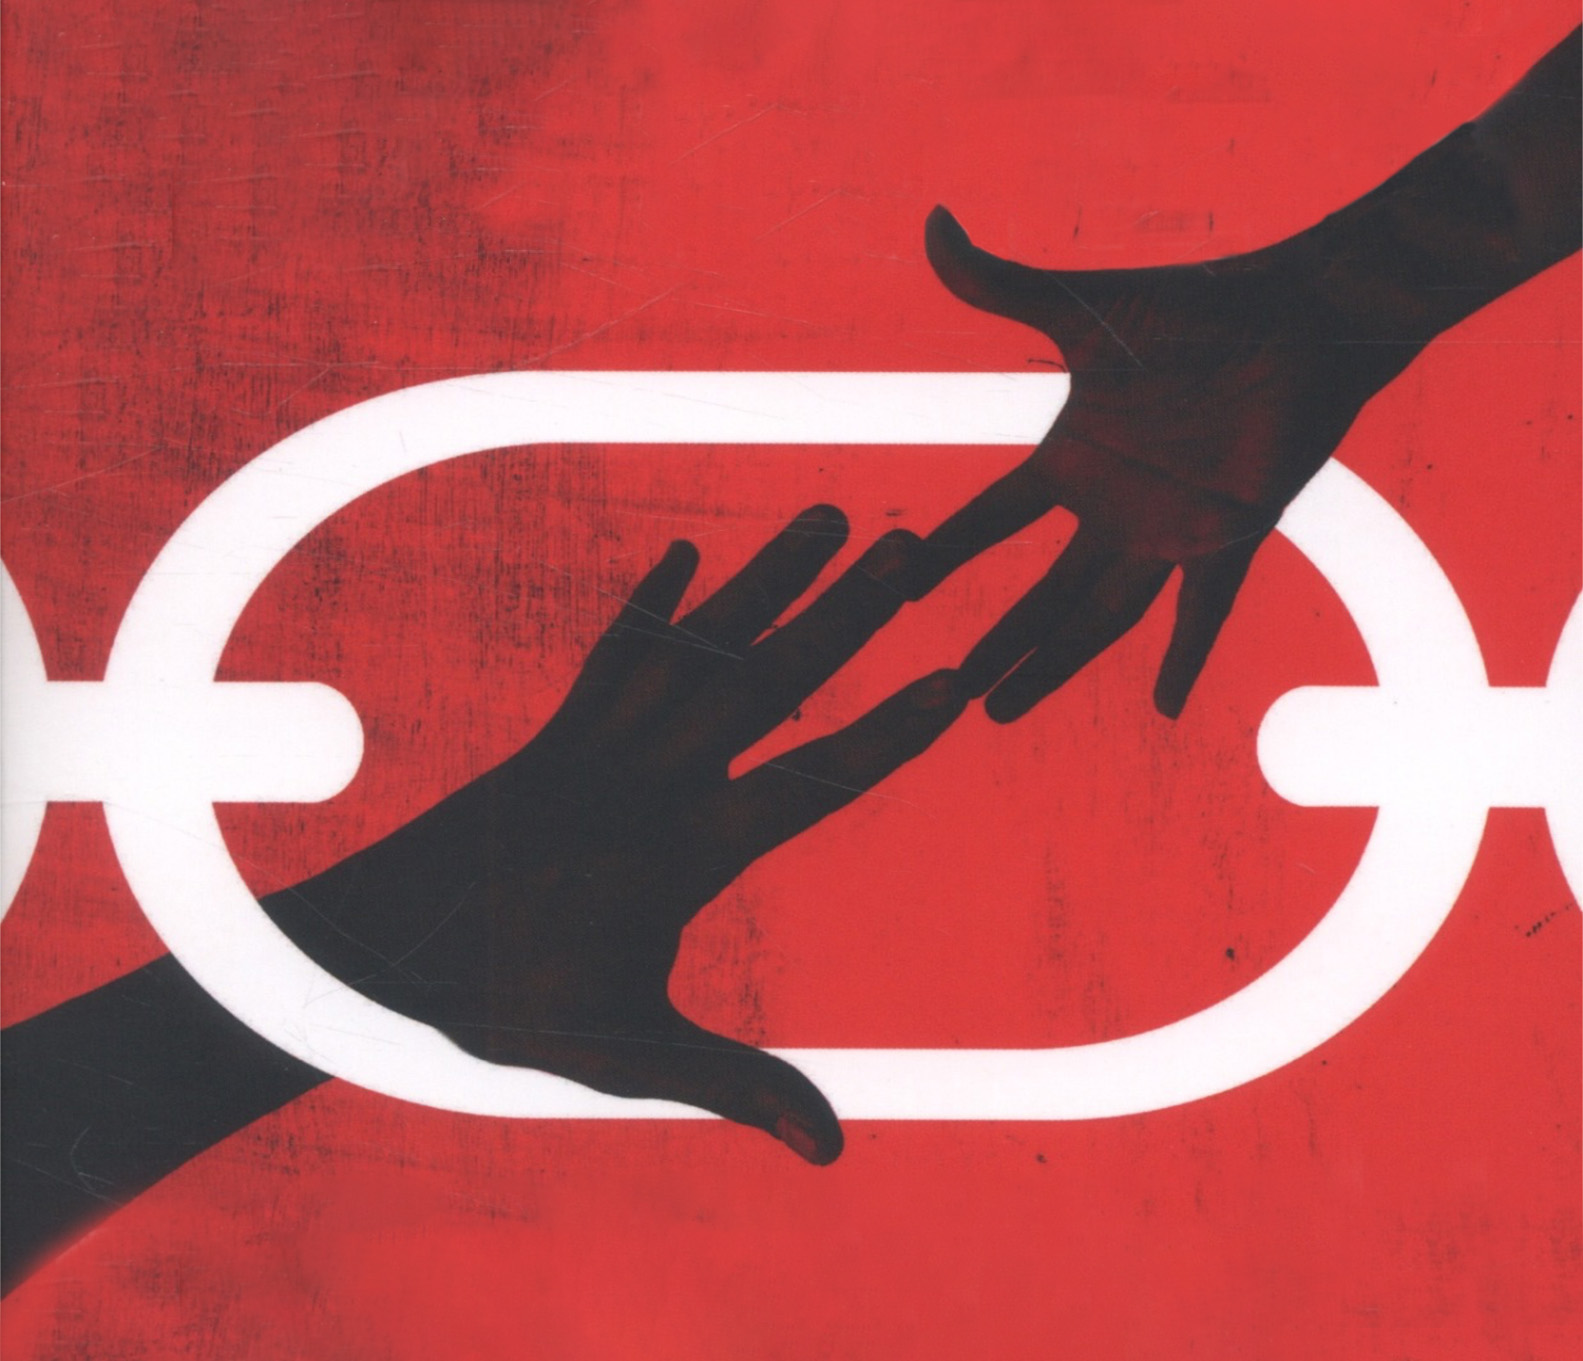 Black silhouetted hands reaching toward each other through a link in a white chain on a red background.